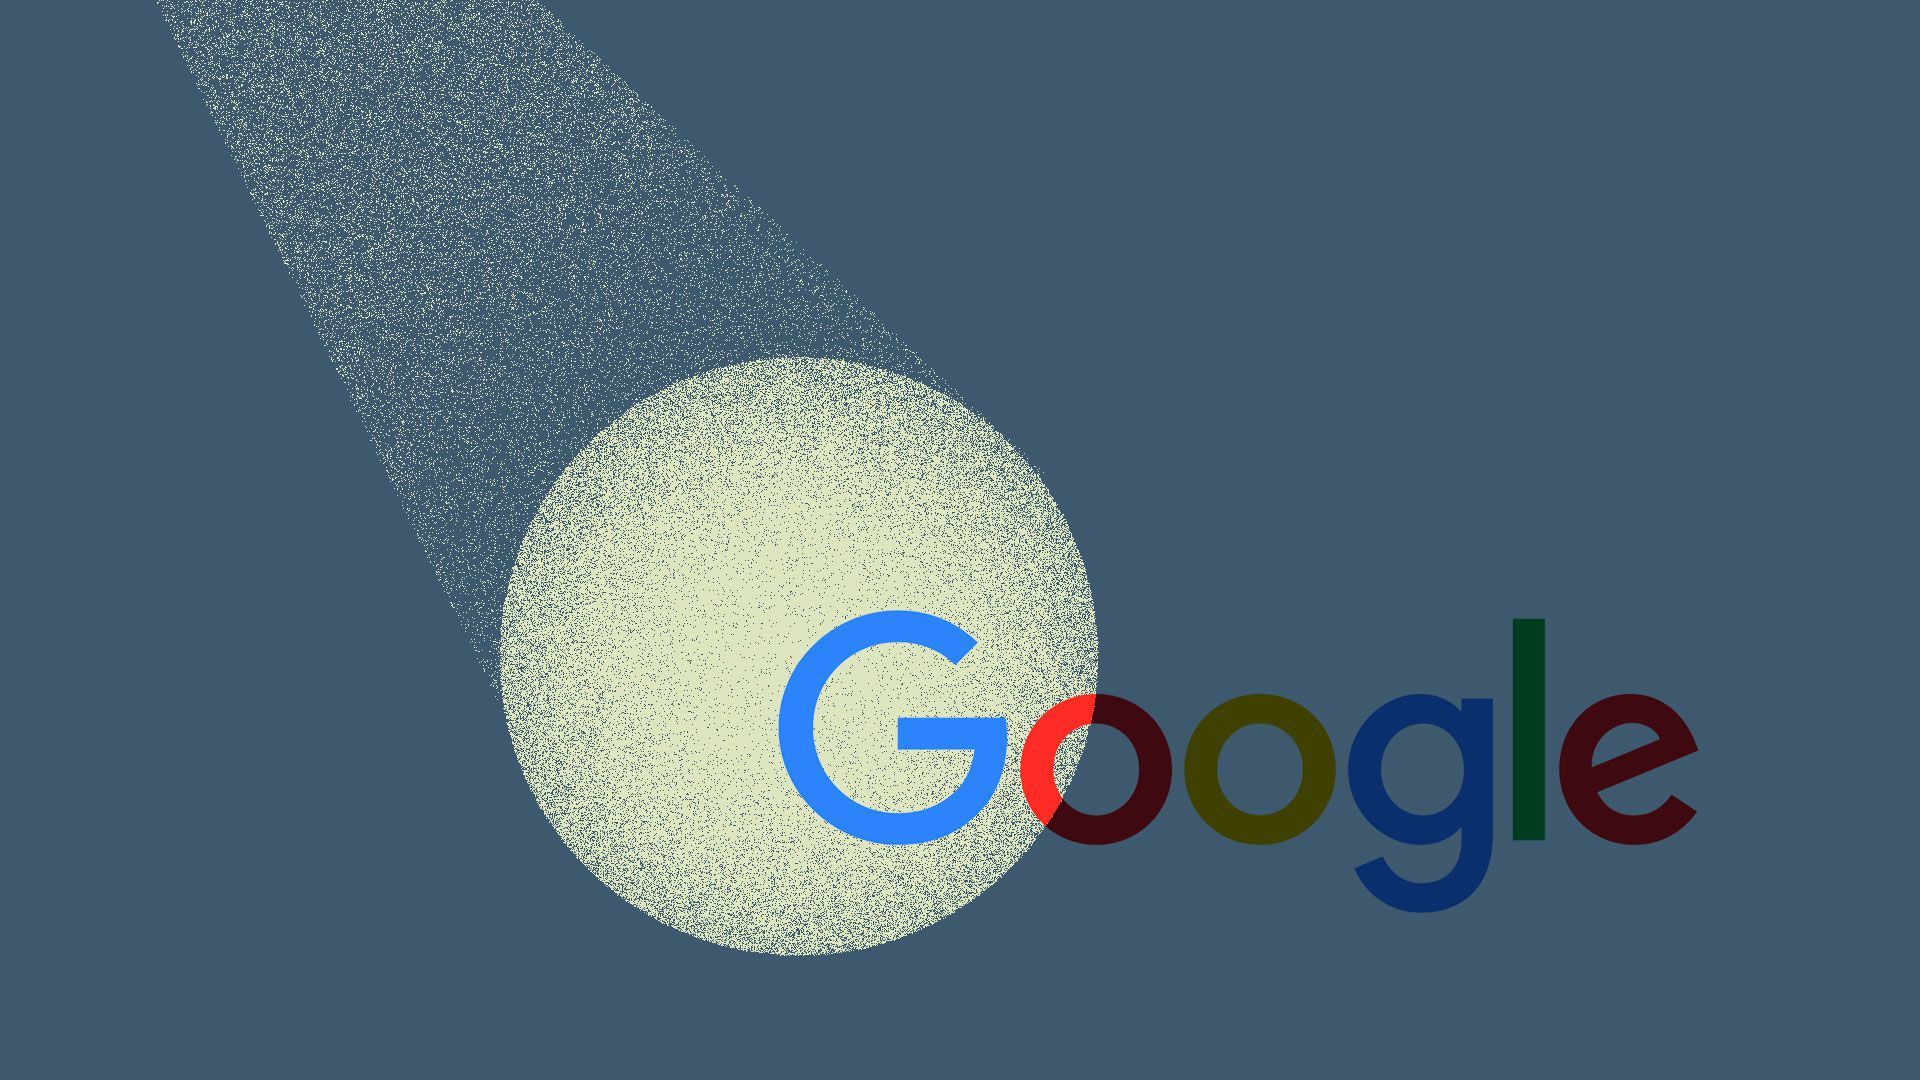 Google logo with a spotlight on part of it